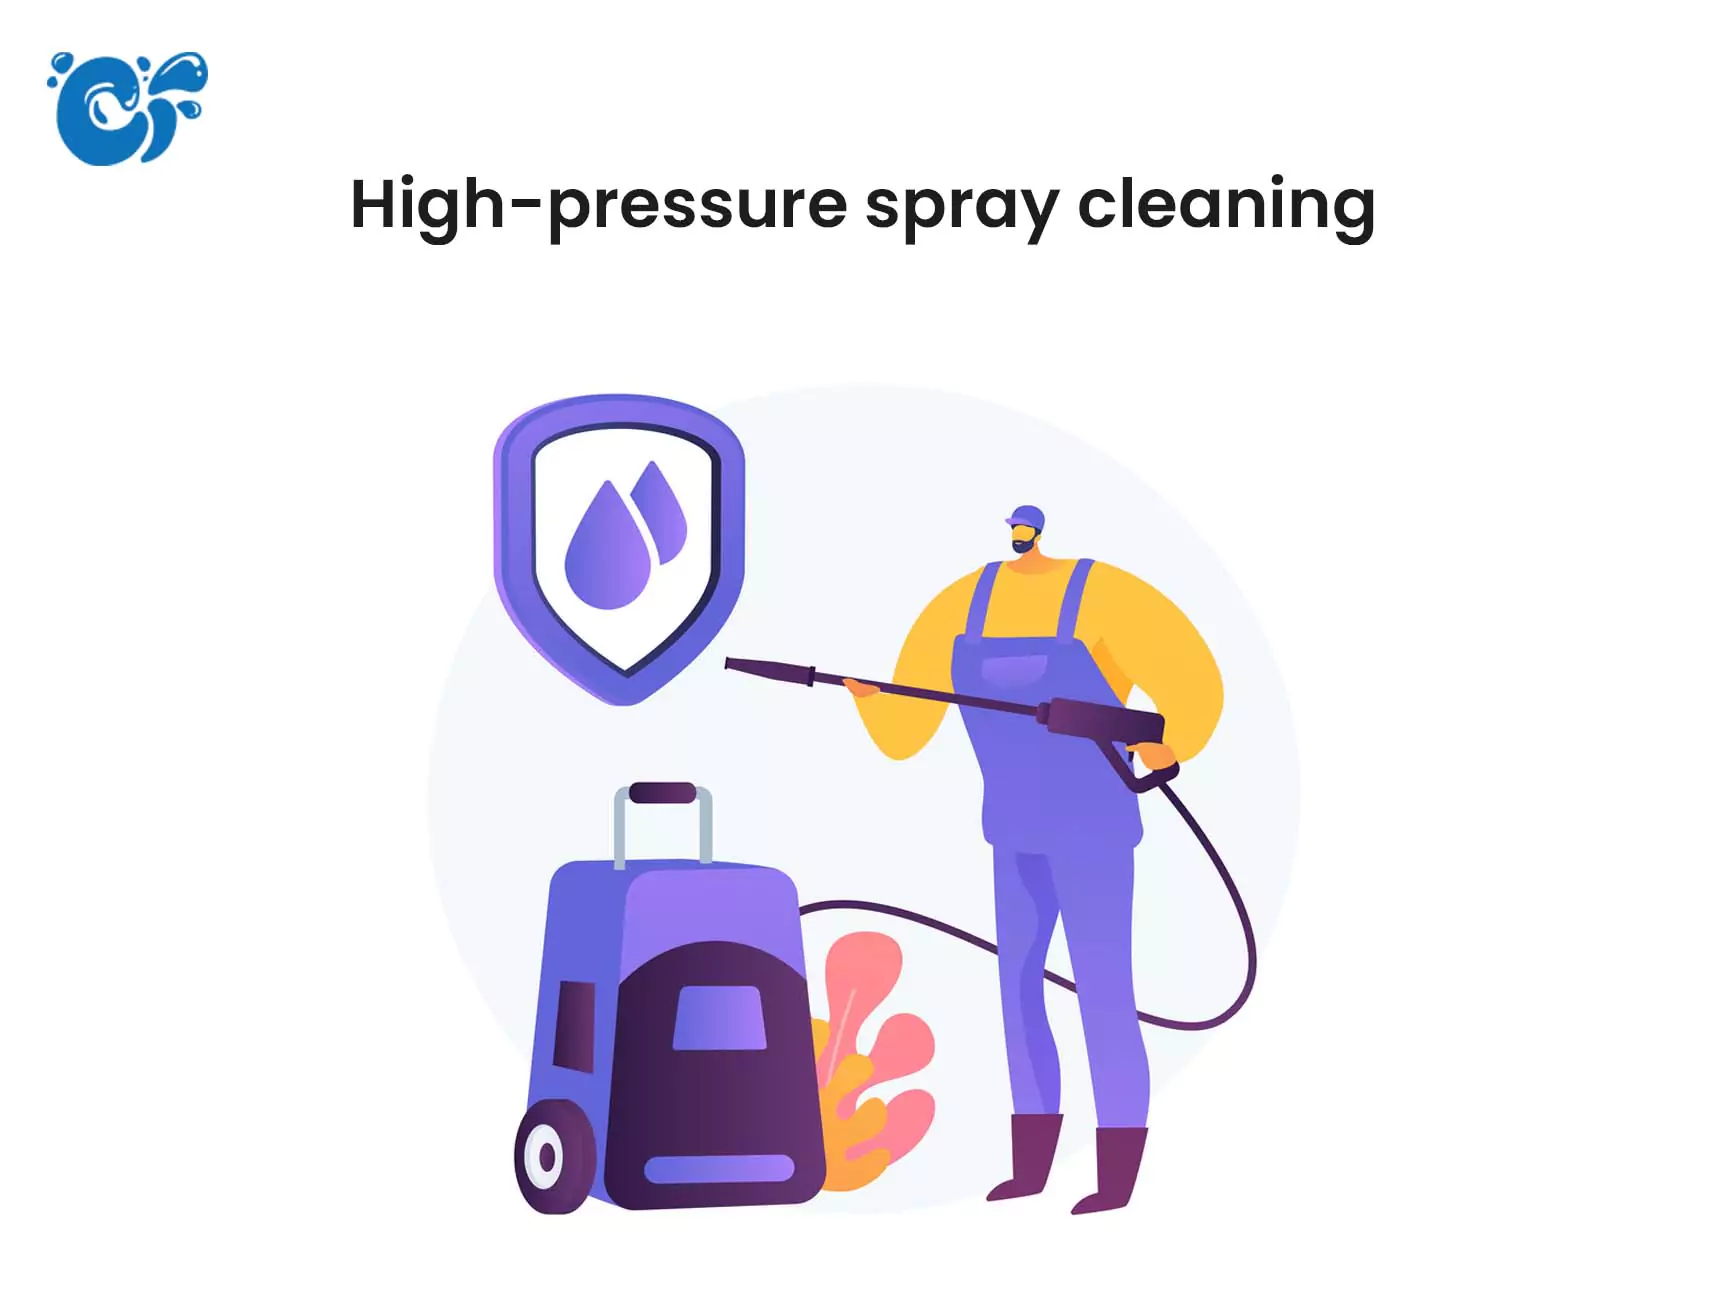 High-pressure spray cleaning